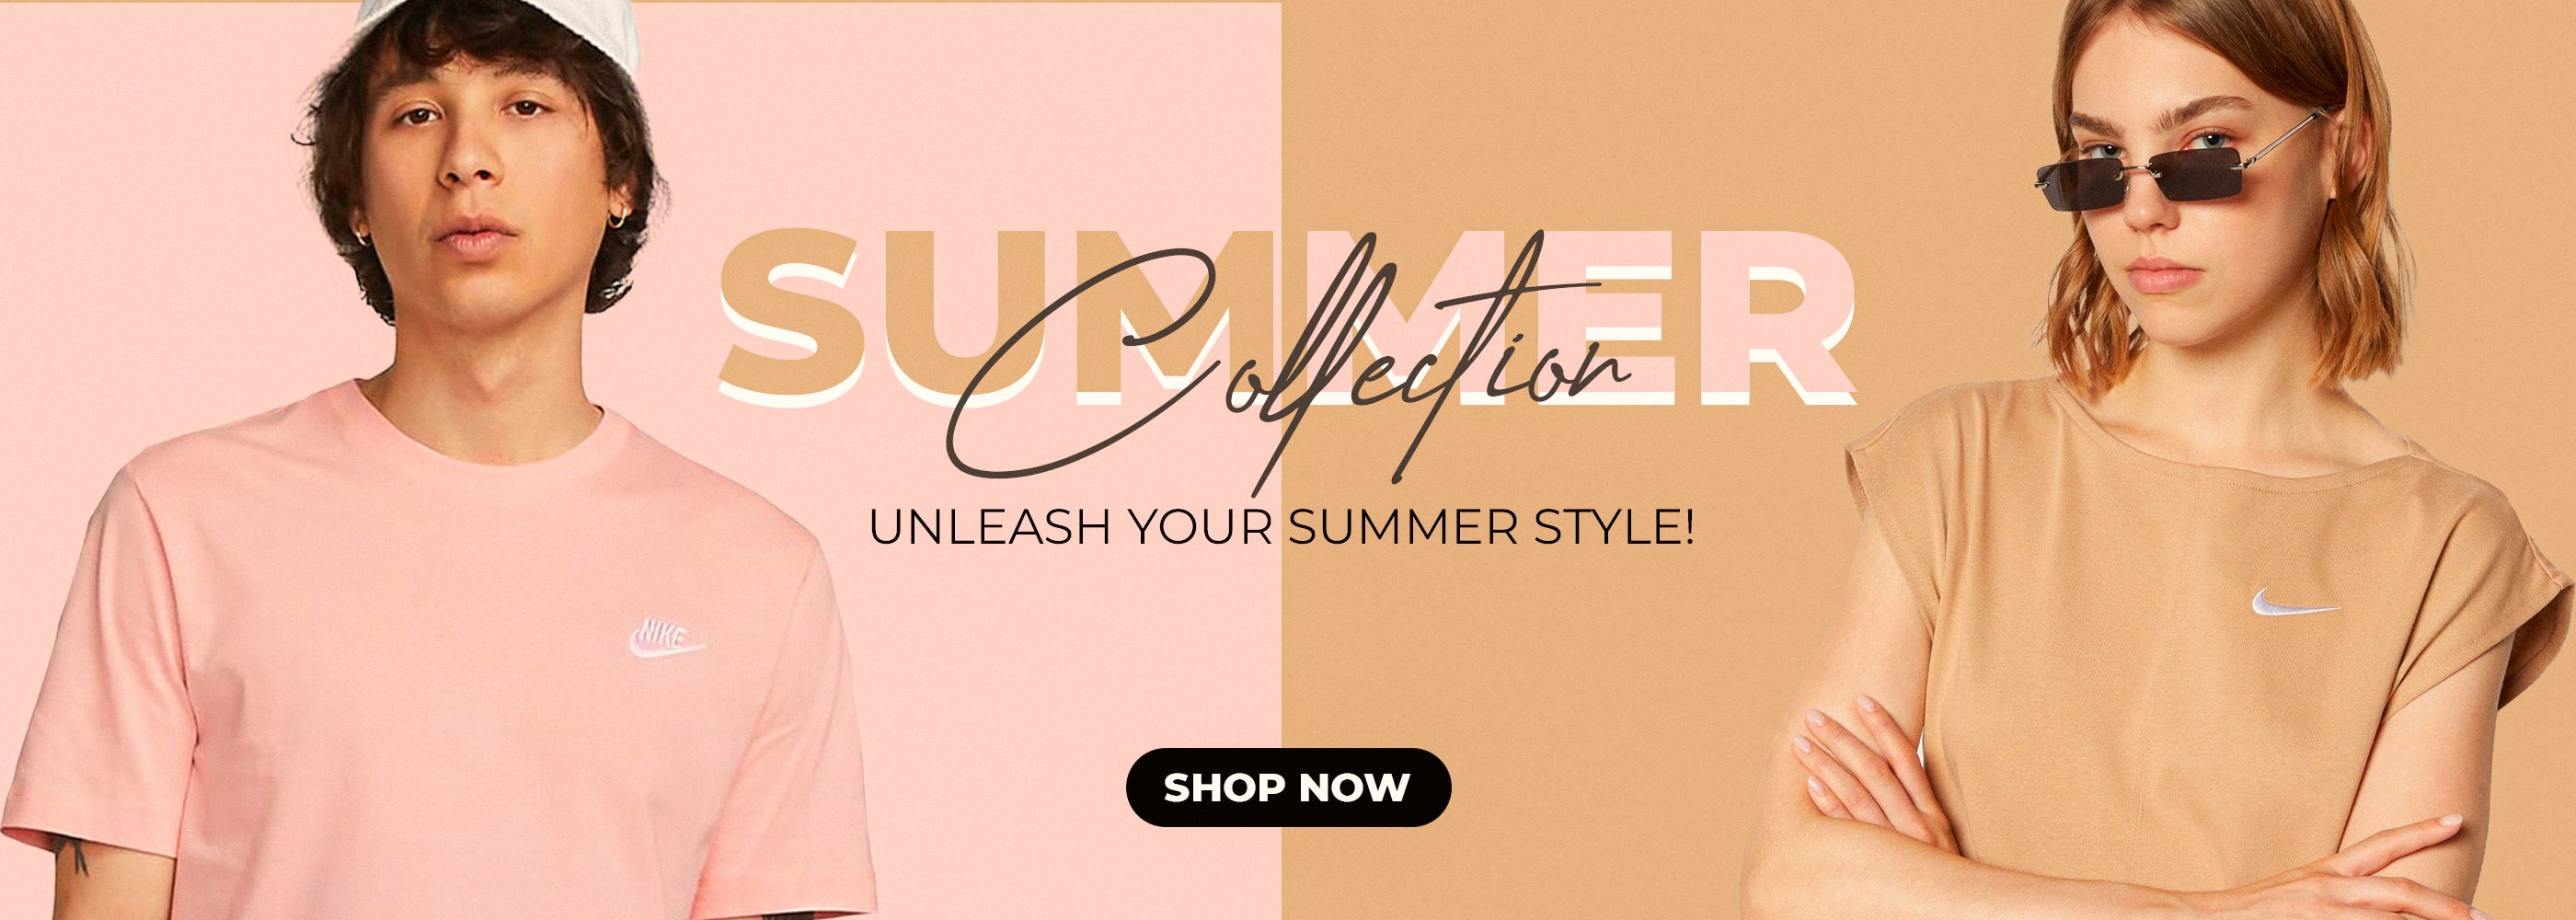 Tops and Bottoms USA summer collection banner